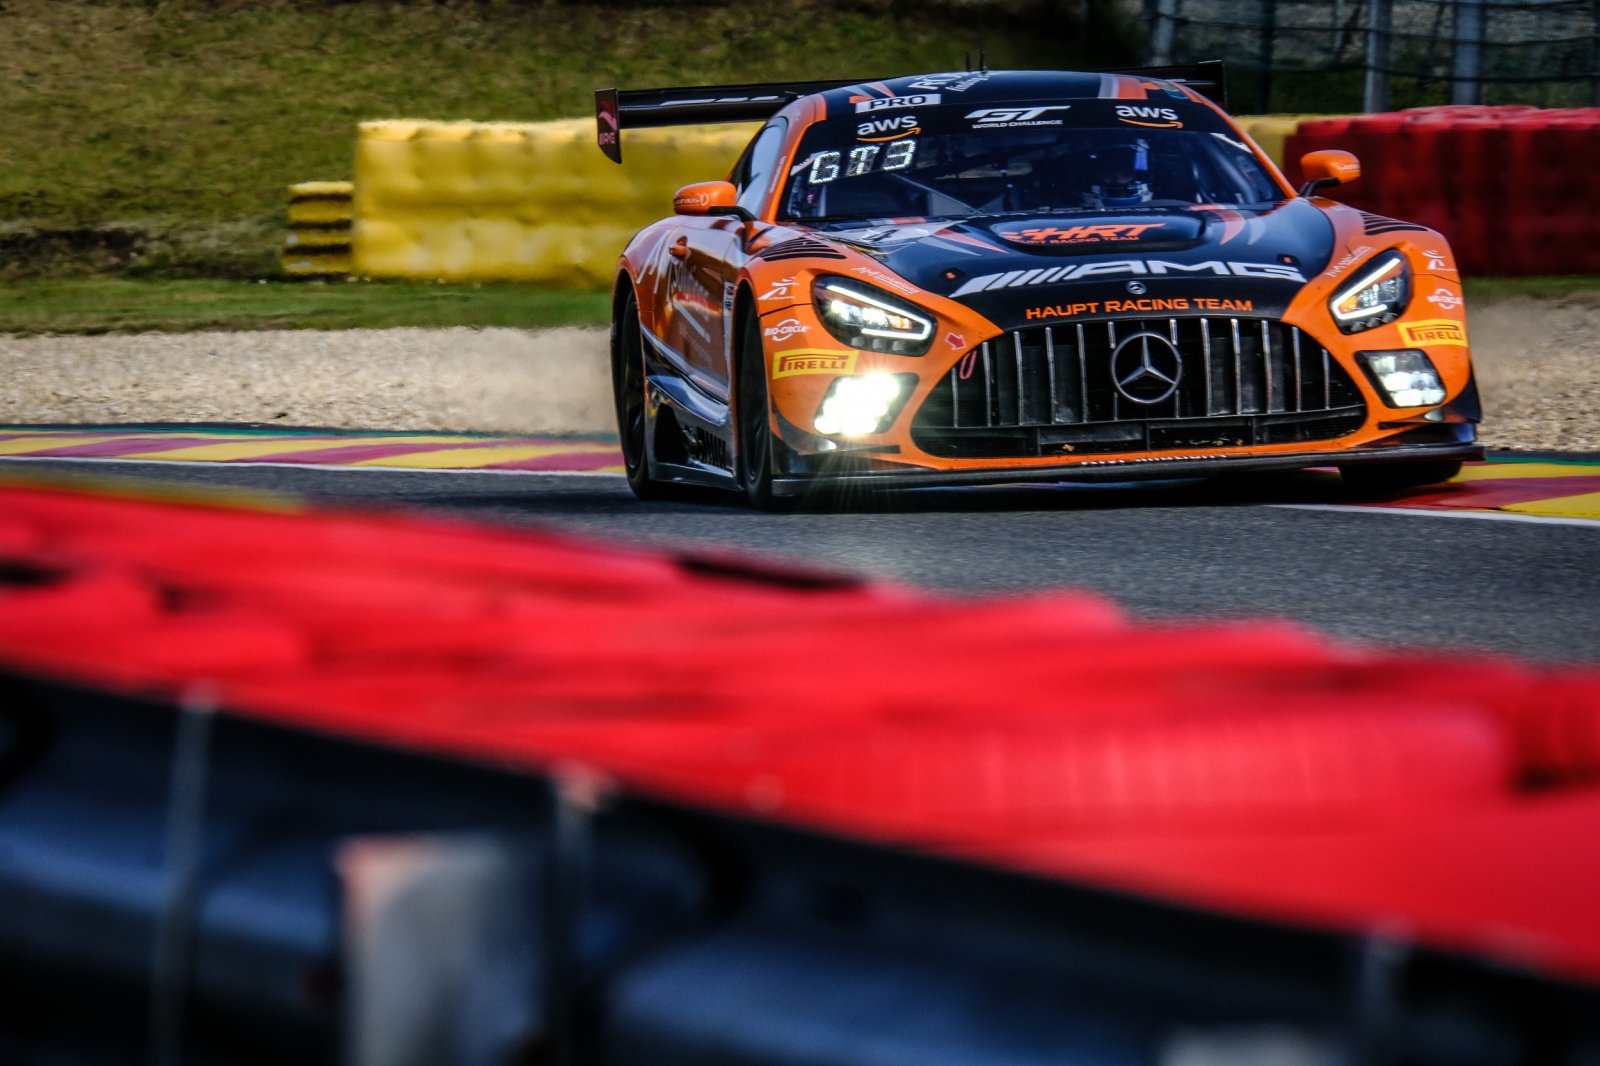 Mercedes-AMG with strong line-up for Total 24 Hours of Spa